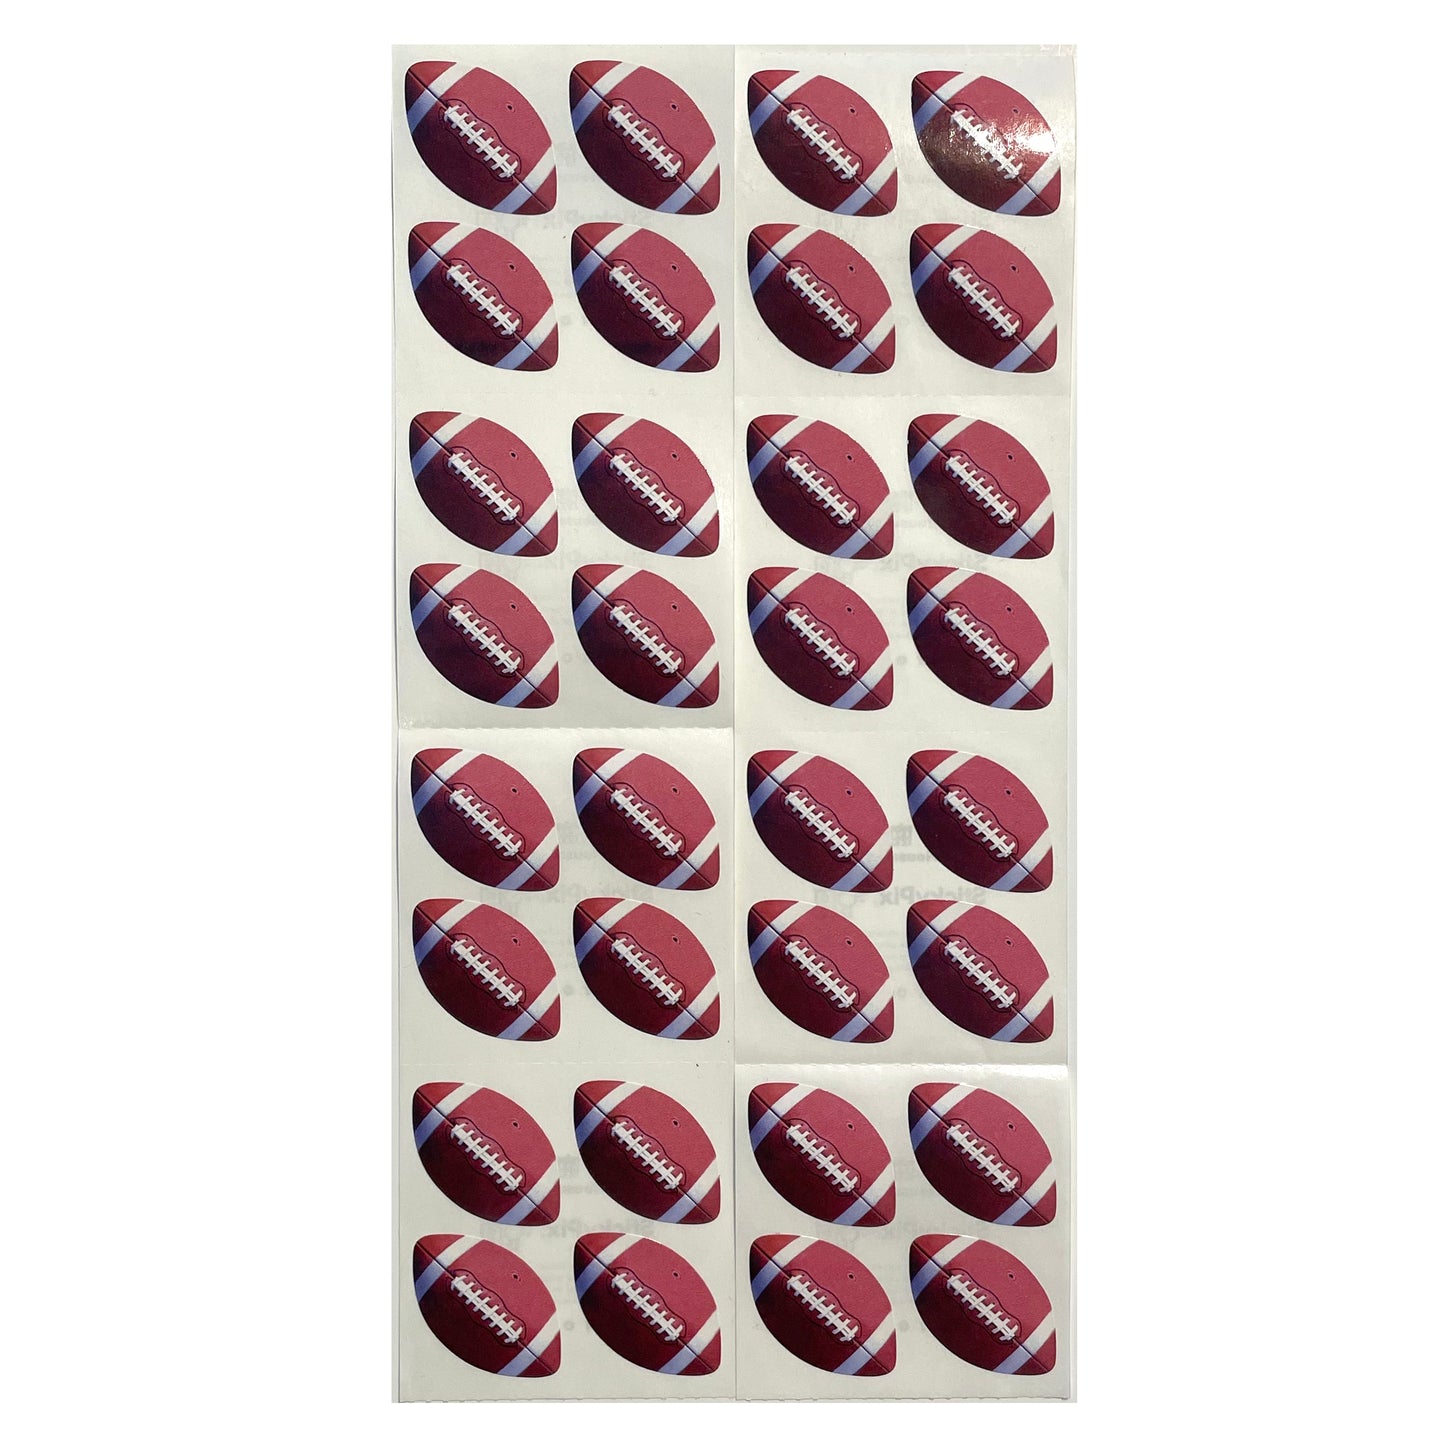 Paper House: Football stickers